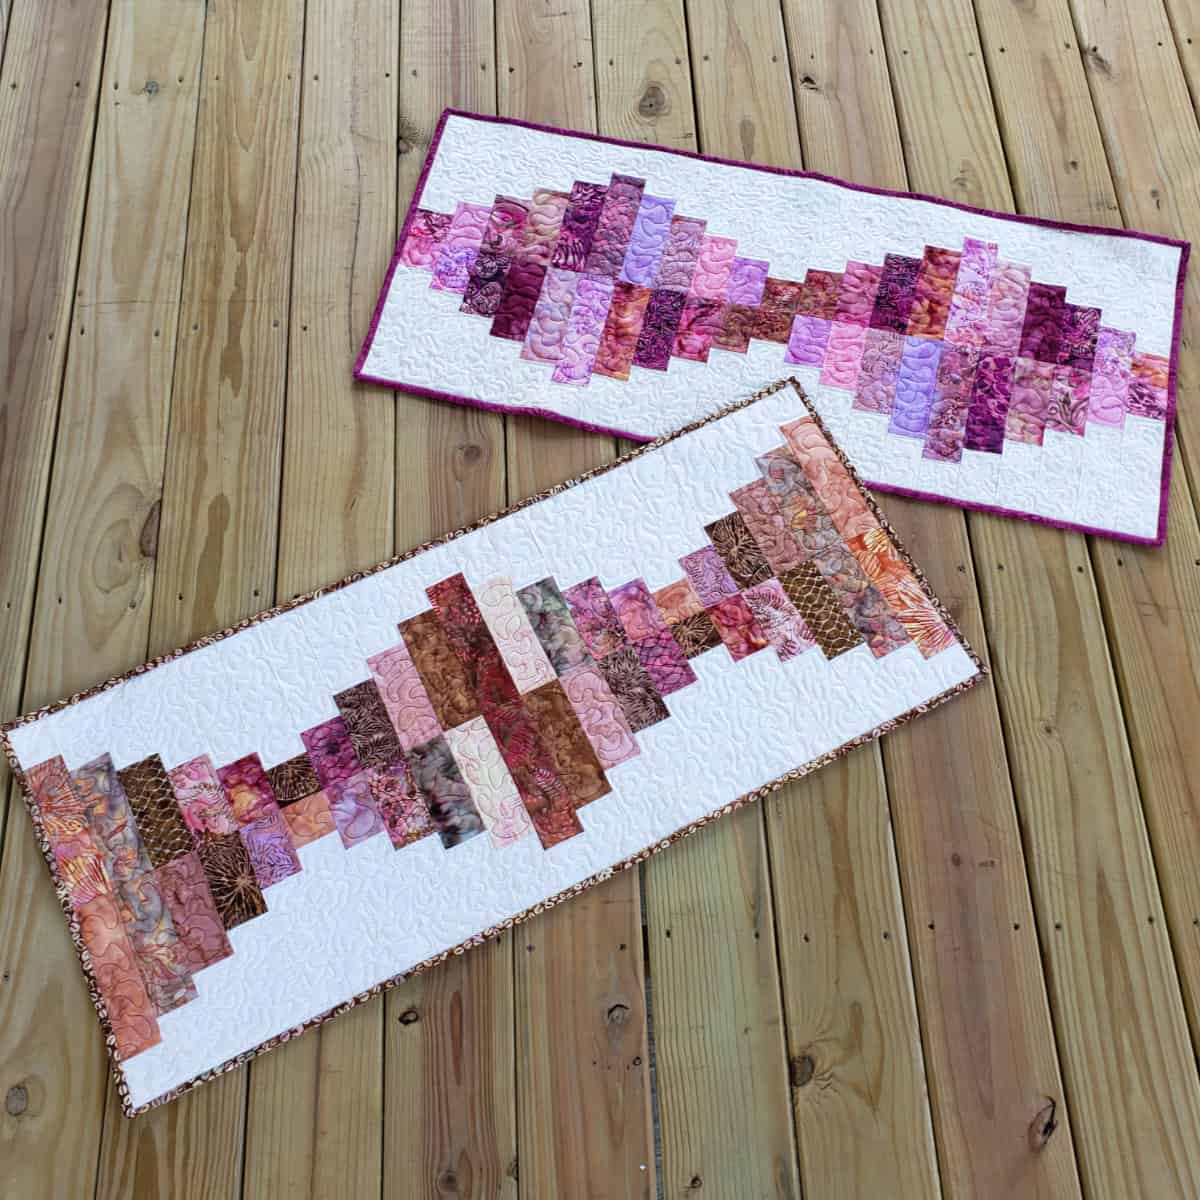 Piano Keys table runners in 2 different colors